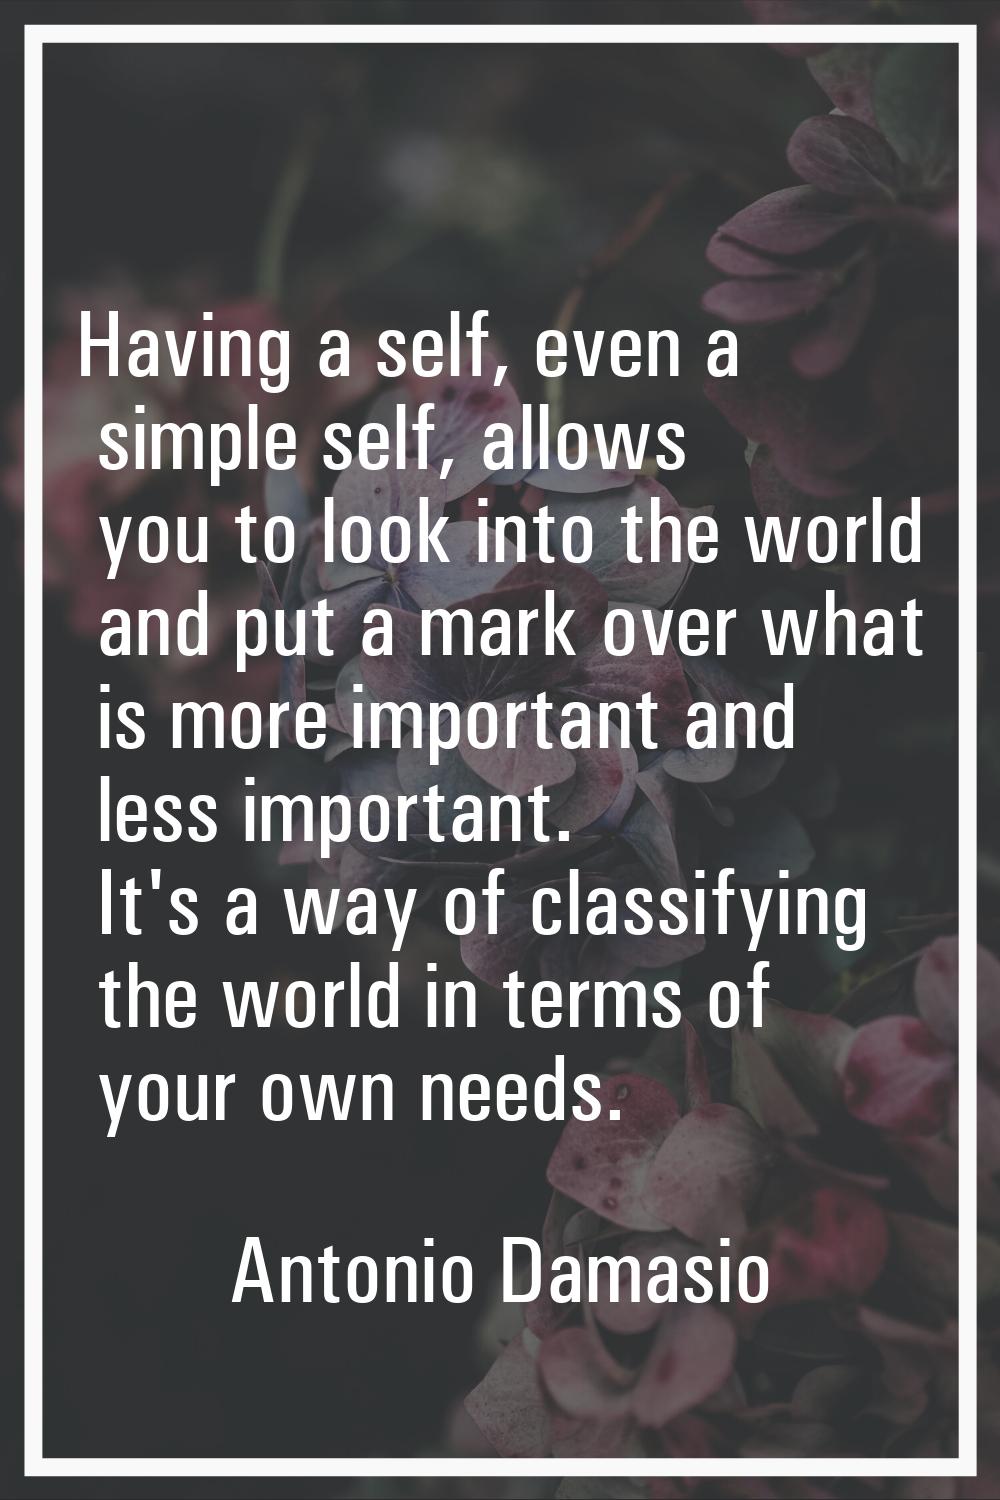 Having a self, even a simple self, allows you to look into the world and put a mark over what is mo